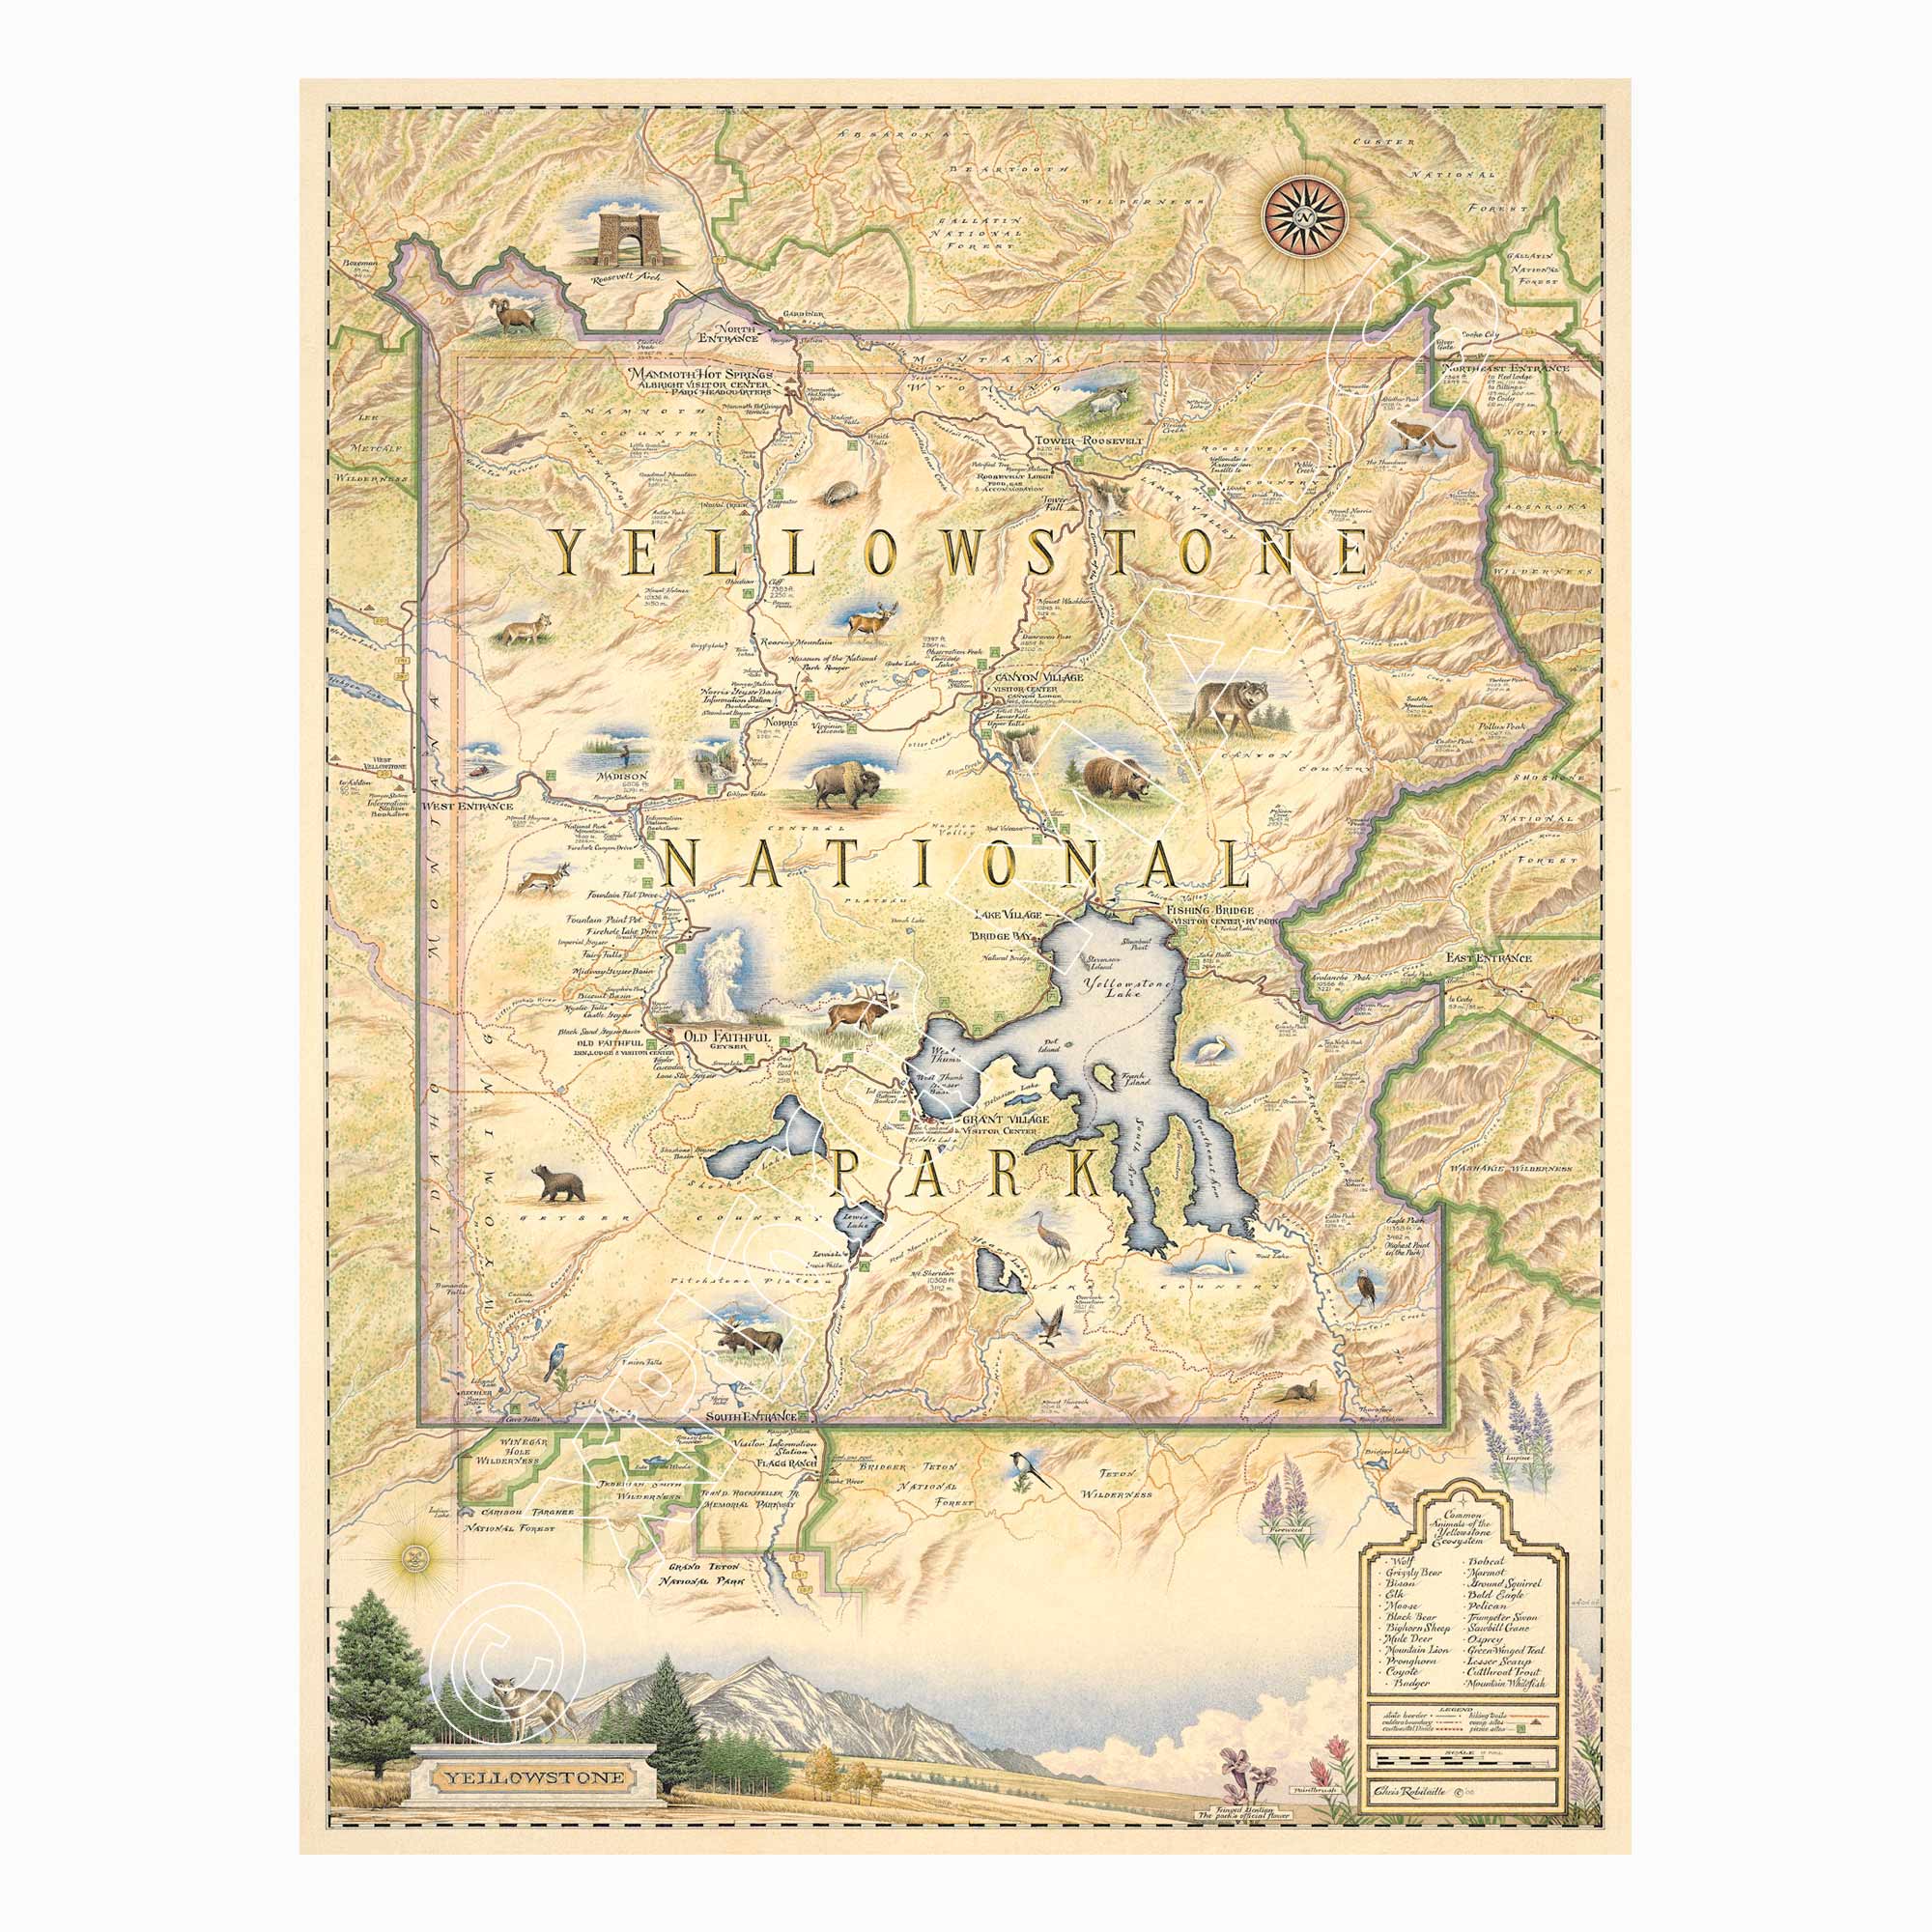 Yellowstone National Park Hand-Drawn Map in earth tones beige and yellow. The map features illustrations of places such as Yellowstone Lake, Old Faithful, and Roosevelt Tower. Flora and fauna include mountain lion, wolf, grizzly bear, fireweed, and lupine. Measures 18x24.